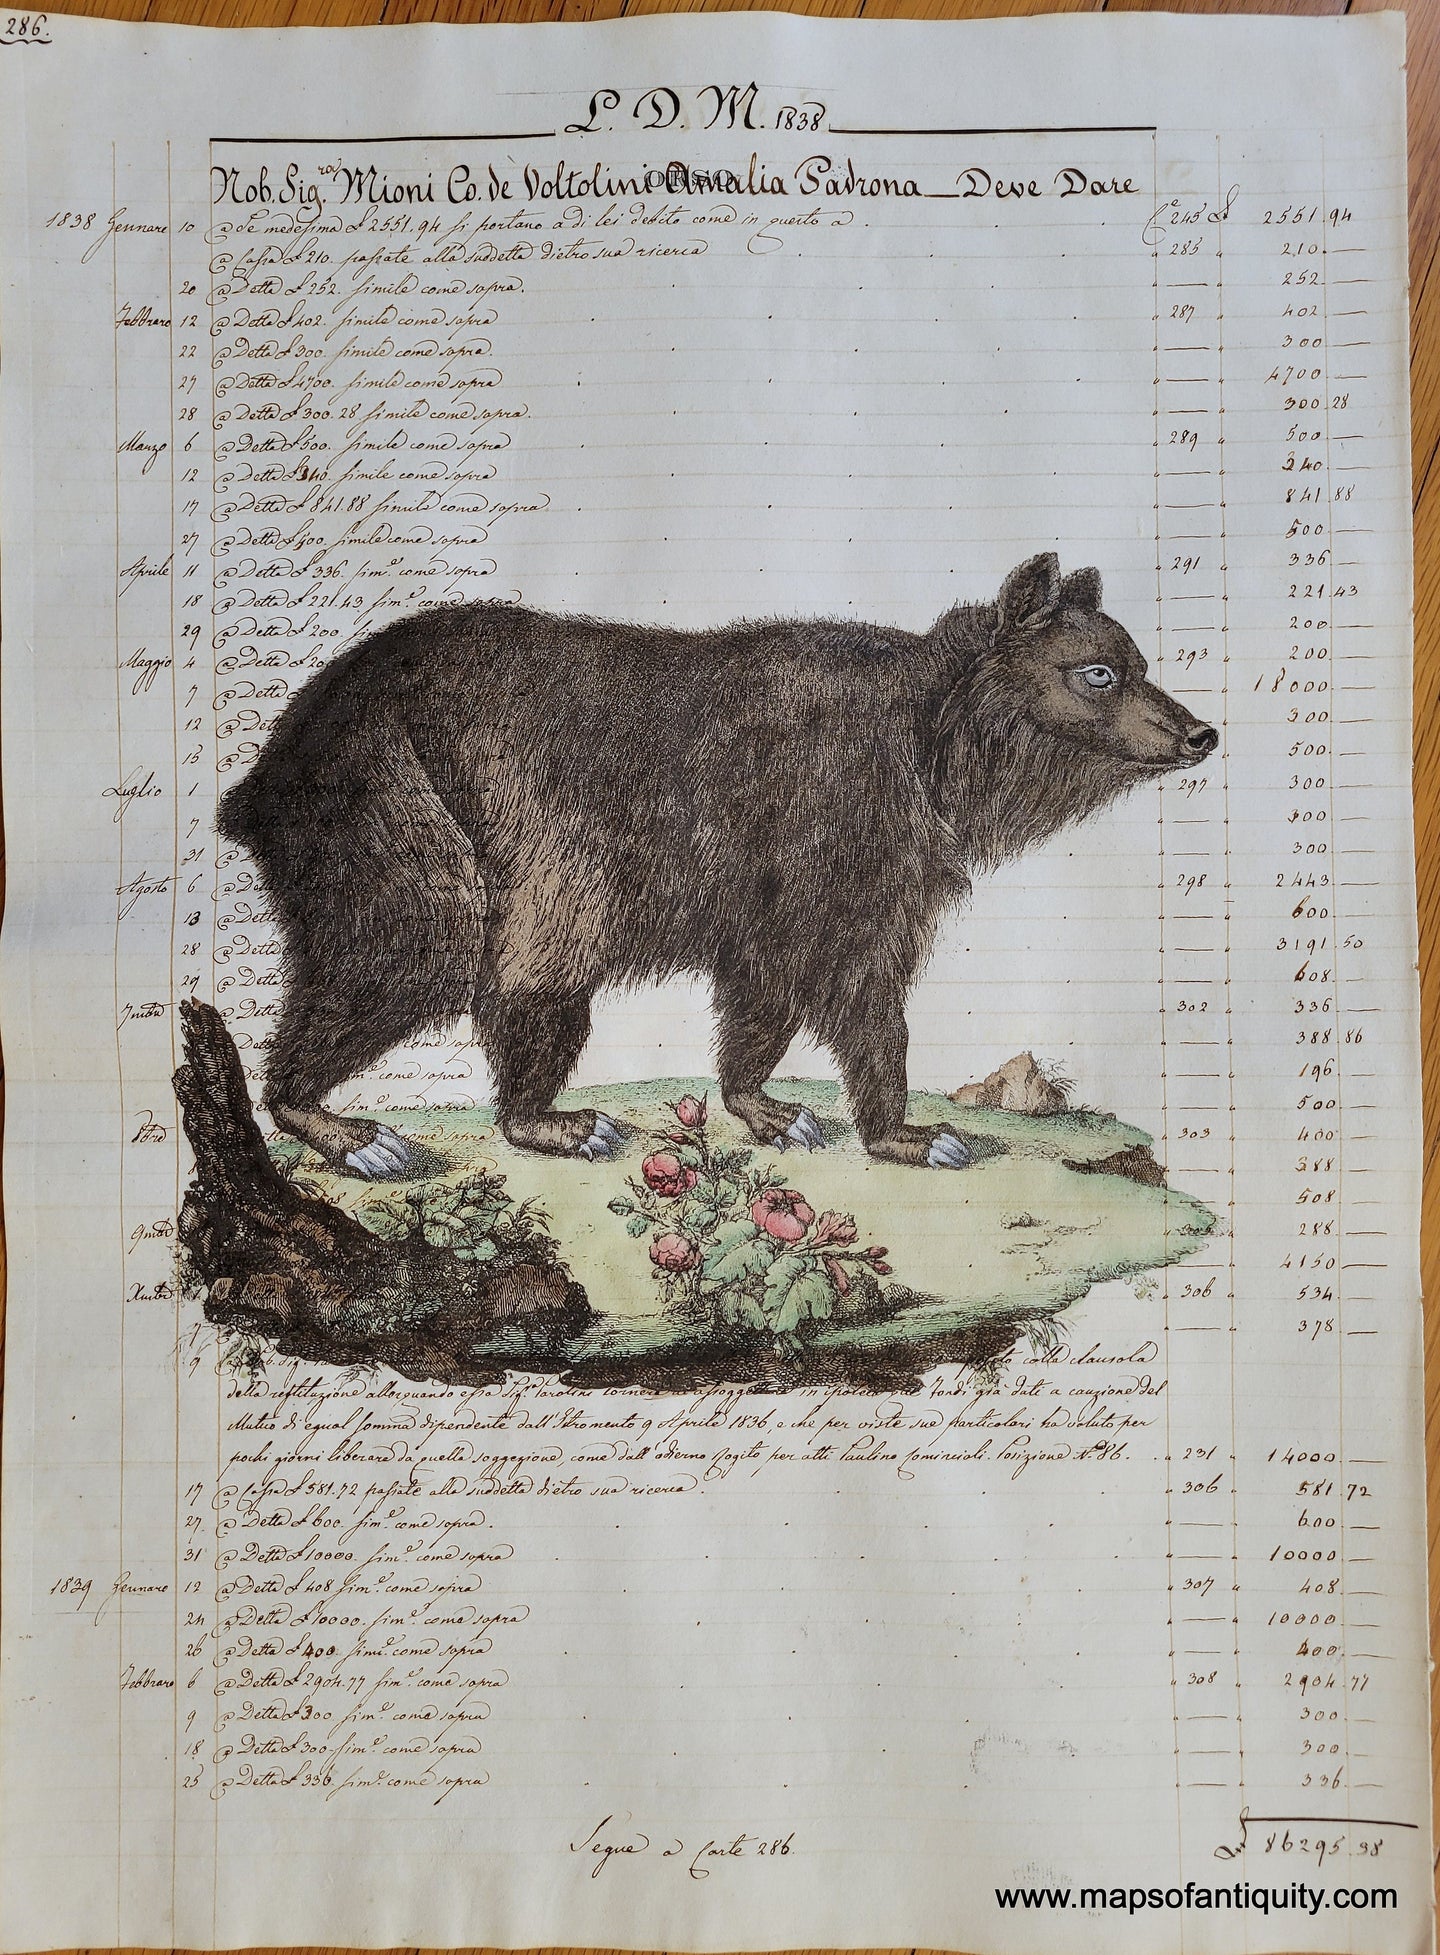 Specialty-Hand-Made-Reproduction-on-Antique-Paper-Orso-Bear---Reproduction-Maps-Of-Antiquity